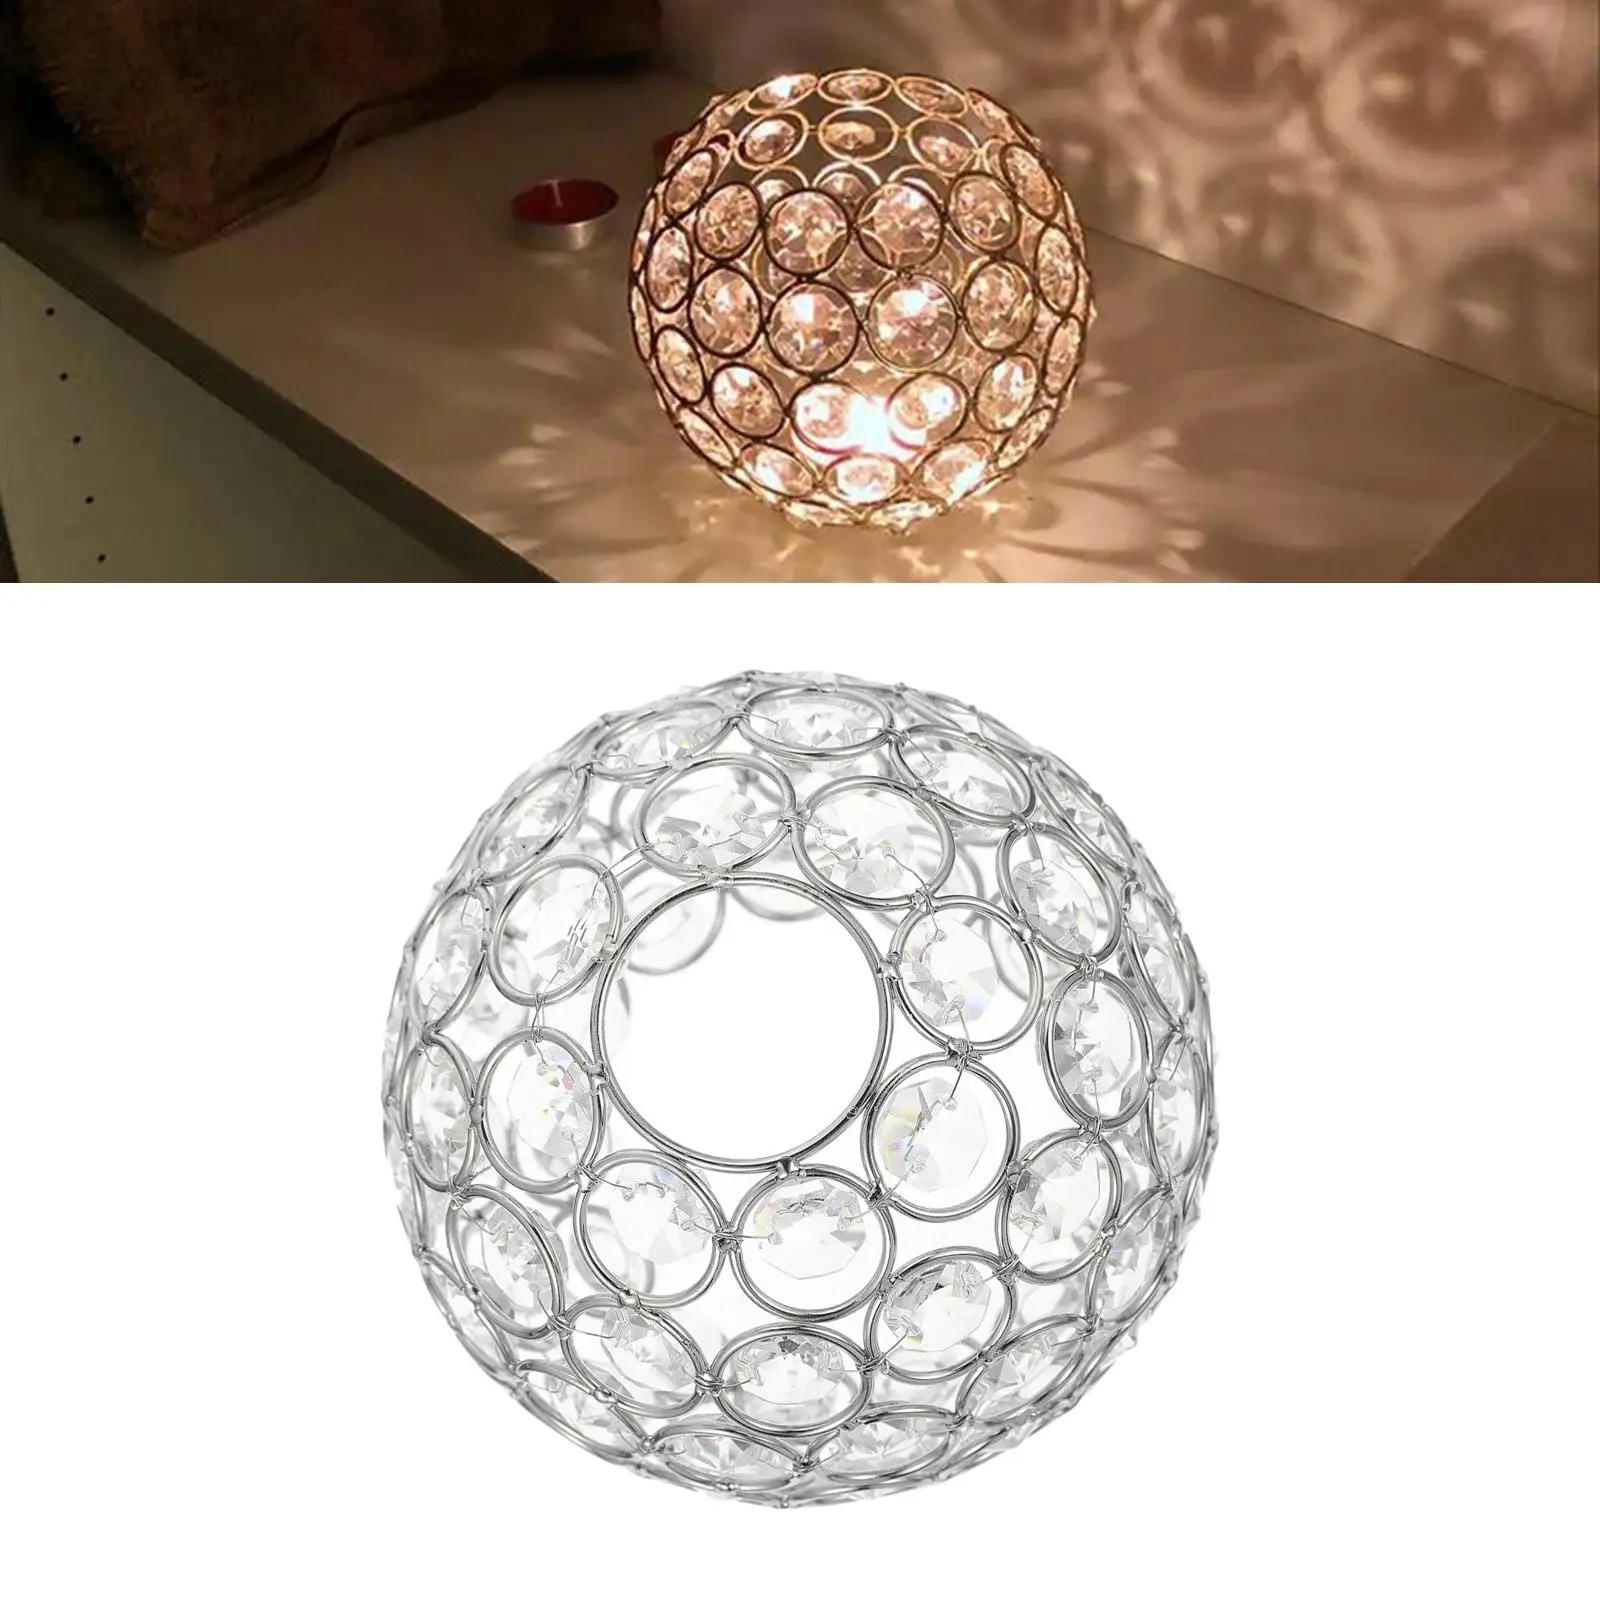 Clip On Ceiling Light Shade Replacement Cover Hand Crafted Crystal Lampshade for Bedside Lamp Reading Lamp Bedroom Office Party